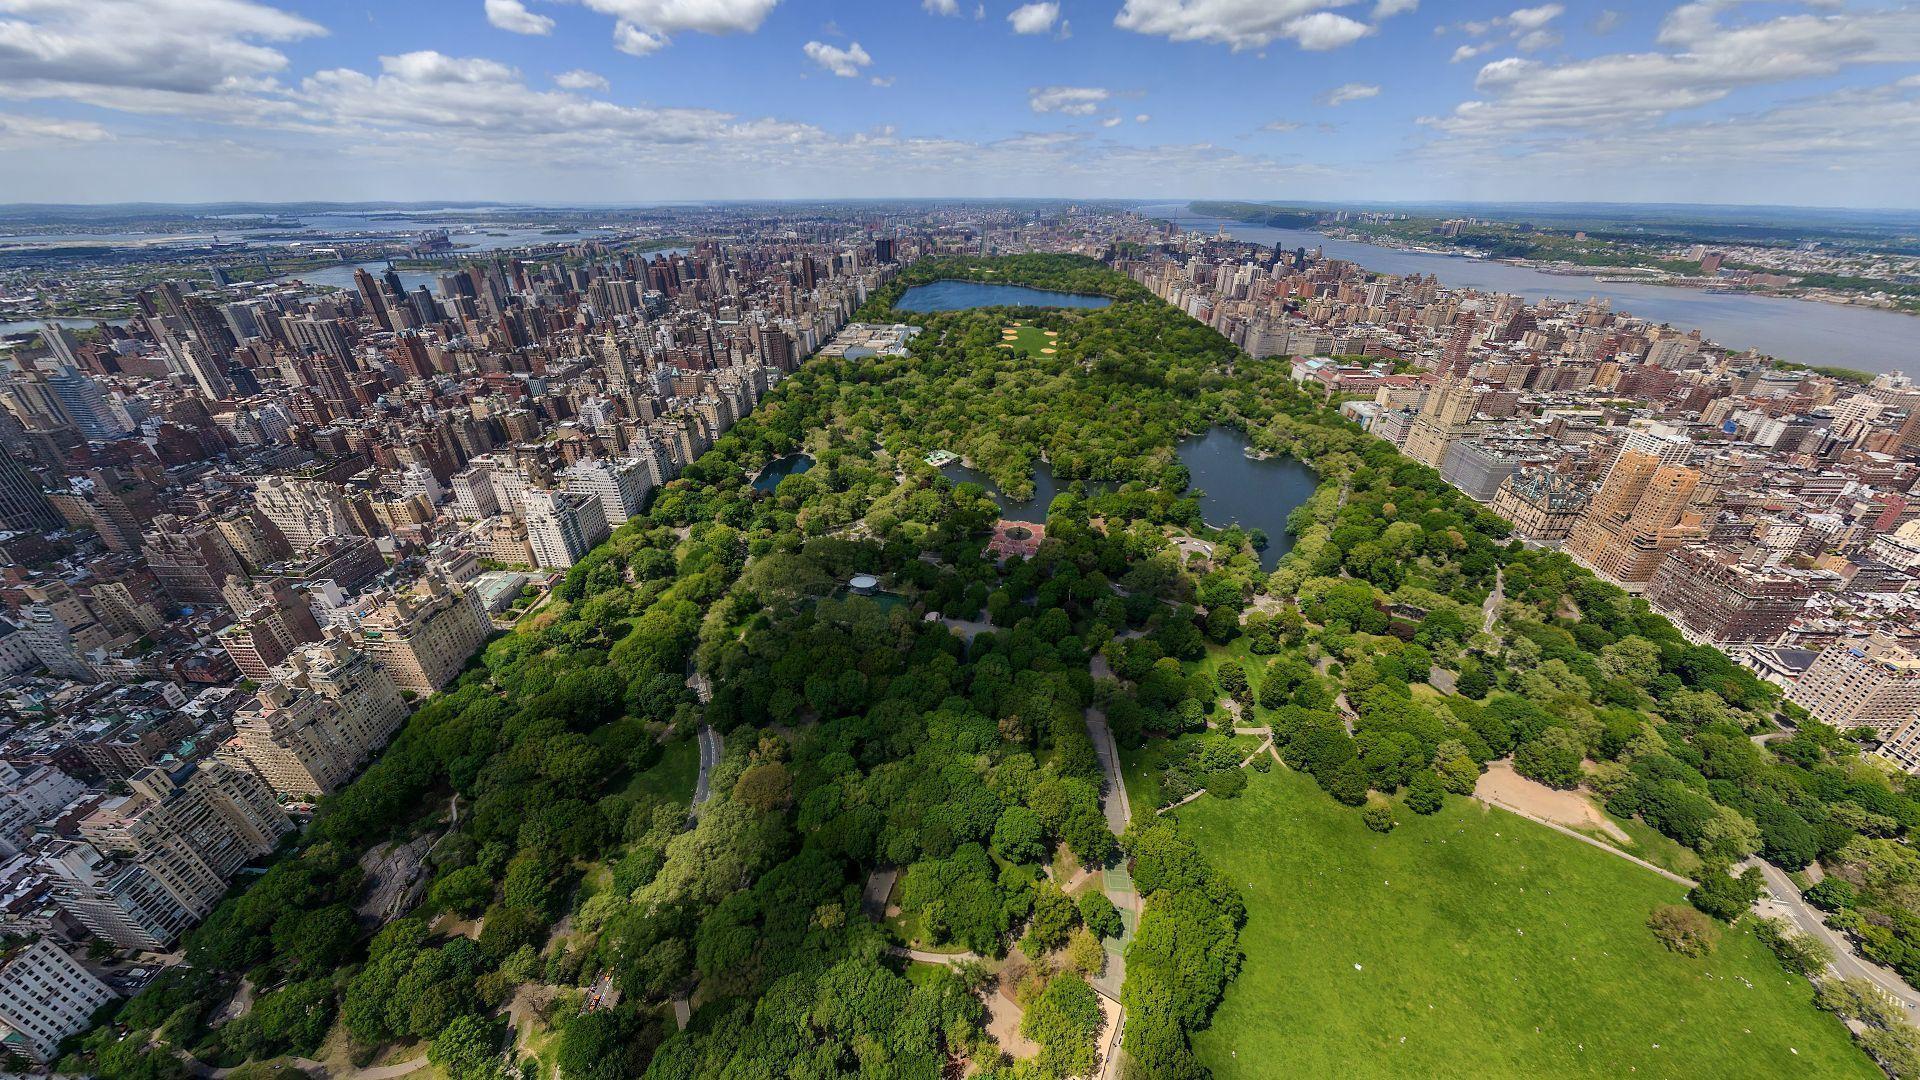 Panoramic view of Central Park Wallpaper 27682. paysages